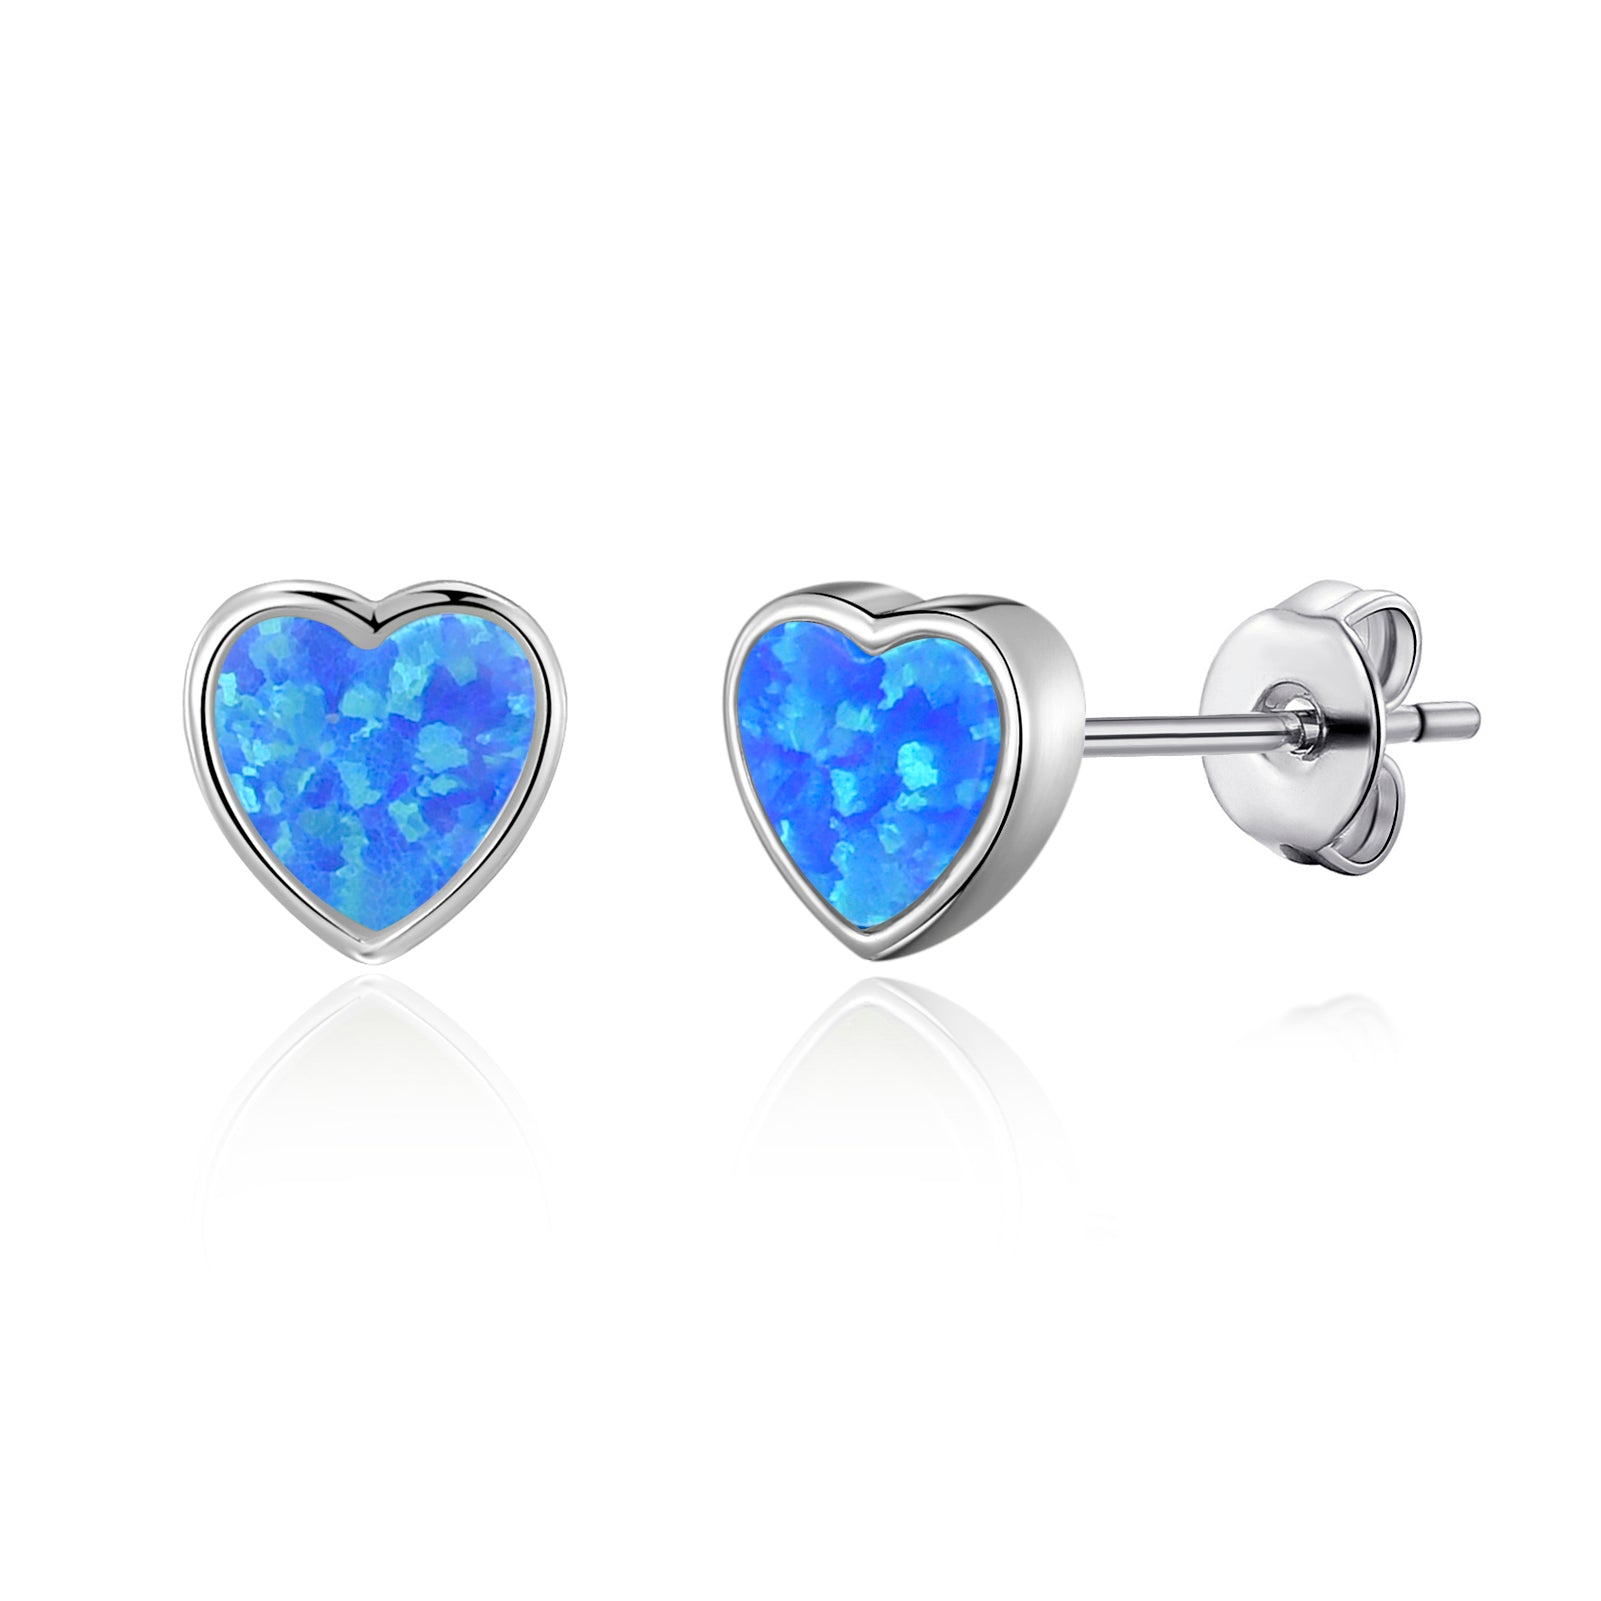 Synthetic Blue Opal Heart Stud Earrings with Quote Card